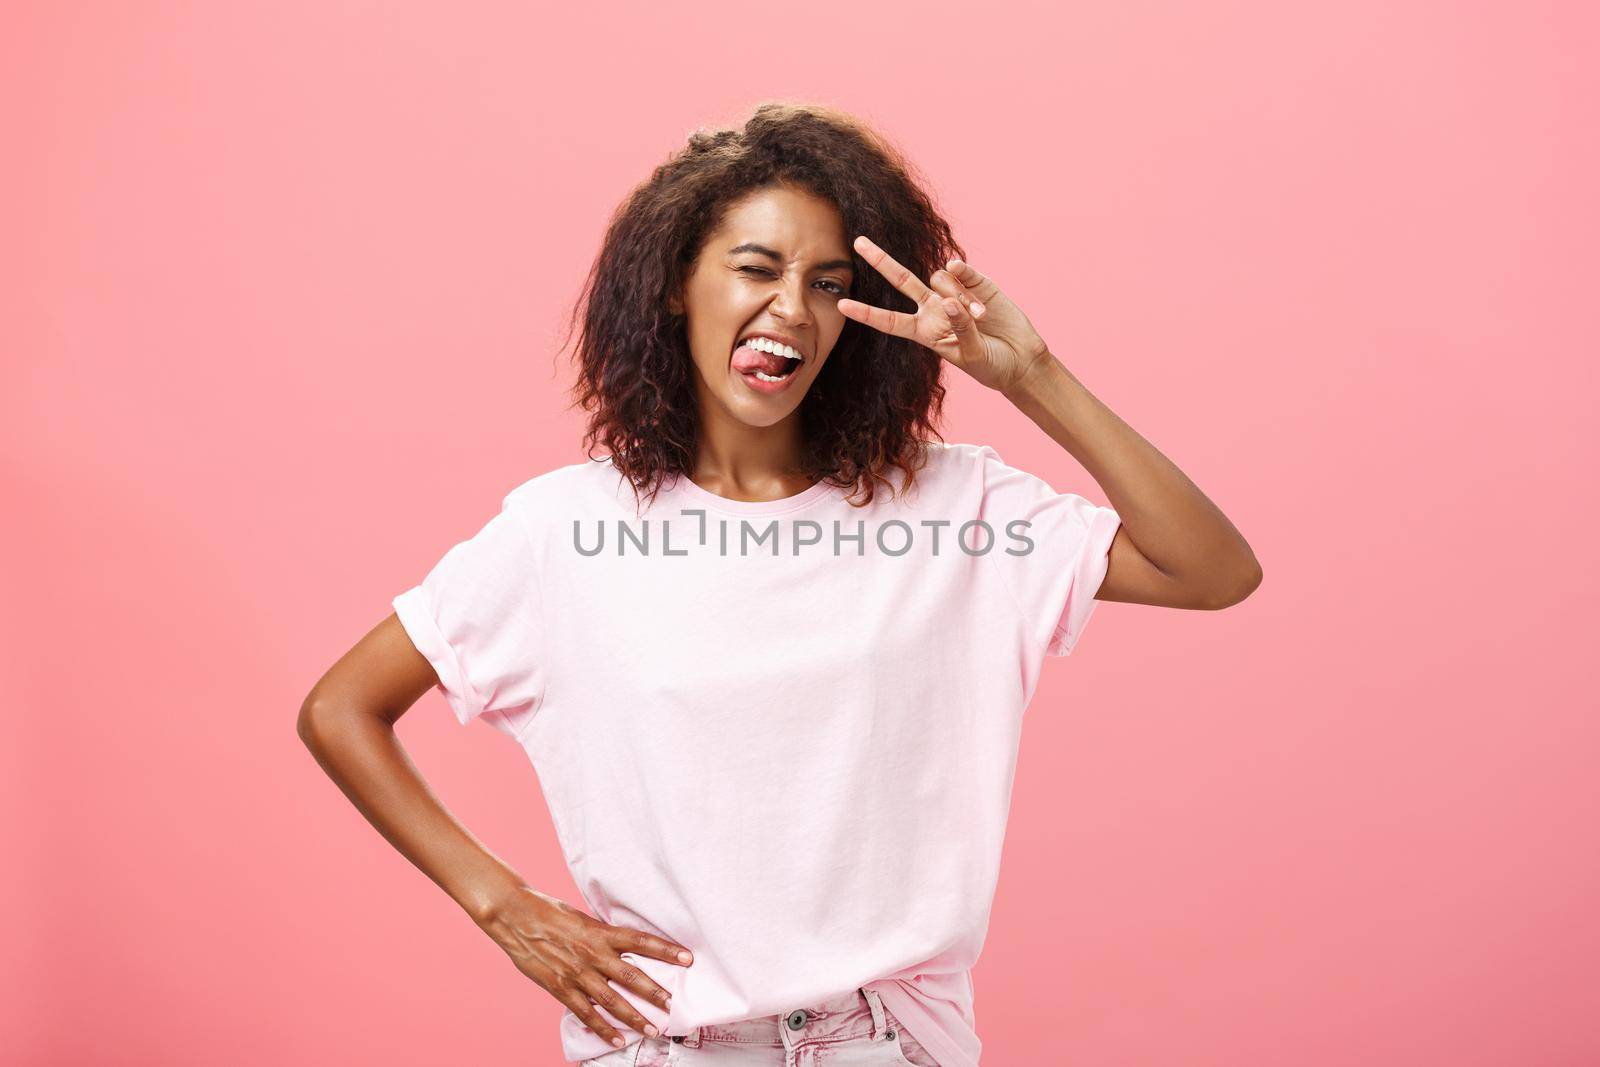 Not afraid express myself. Joyful charismatic african american woman in t-shirt with afro haircut showing tongue playfully and daring making peace sign over eye and winking posing over pink background.